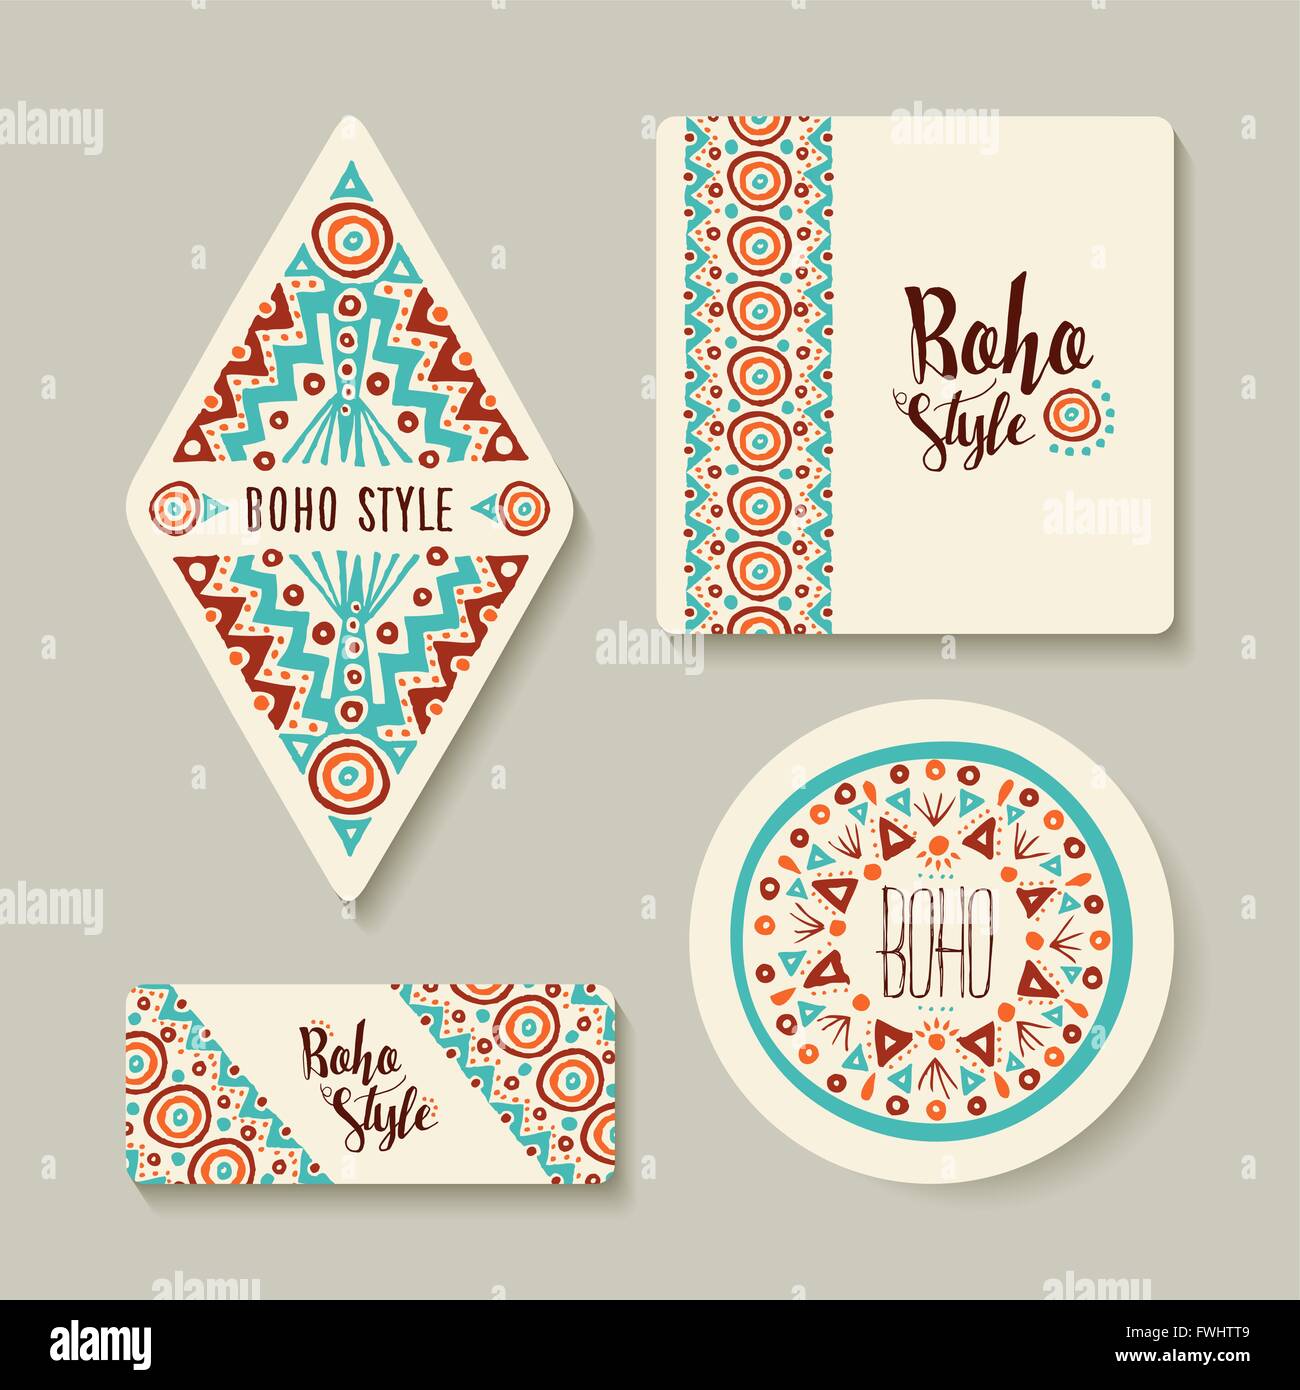 Boho style printable tags with tribal handmade designs. Different label templates for shop or decoration. EPS10 vector. Stock Vector